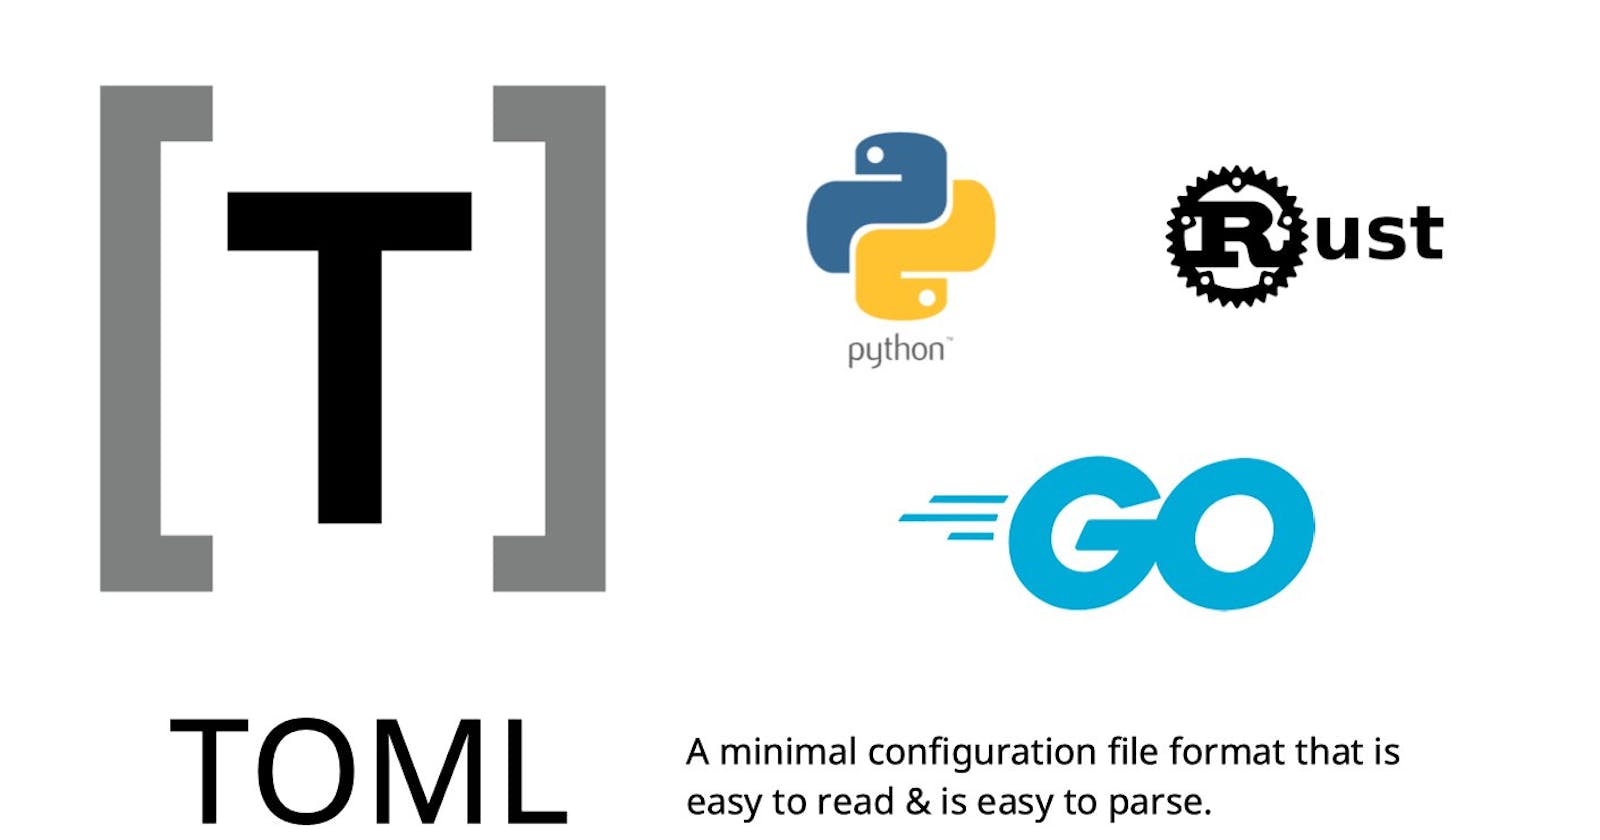 Intro to TOML configuration file format